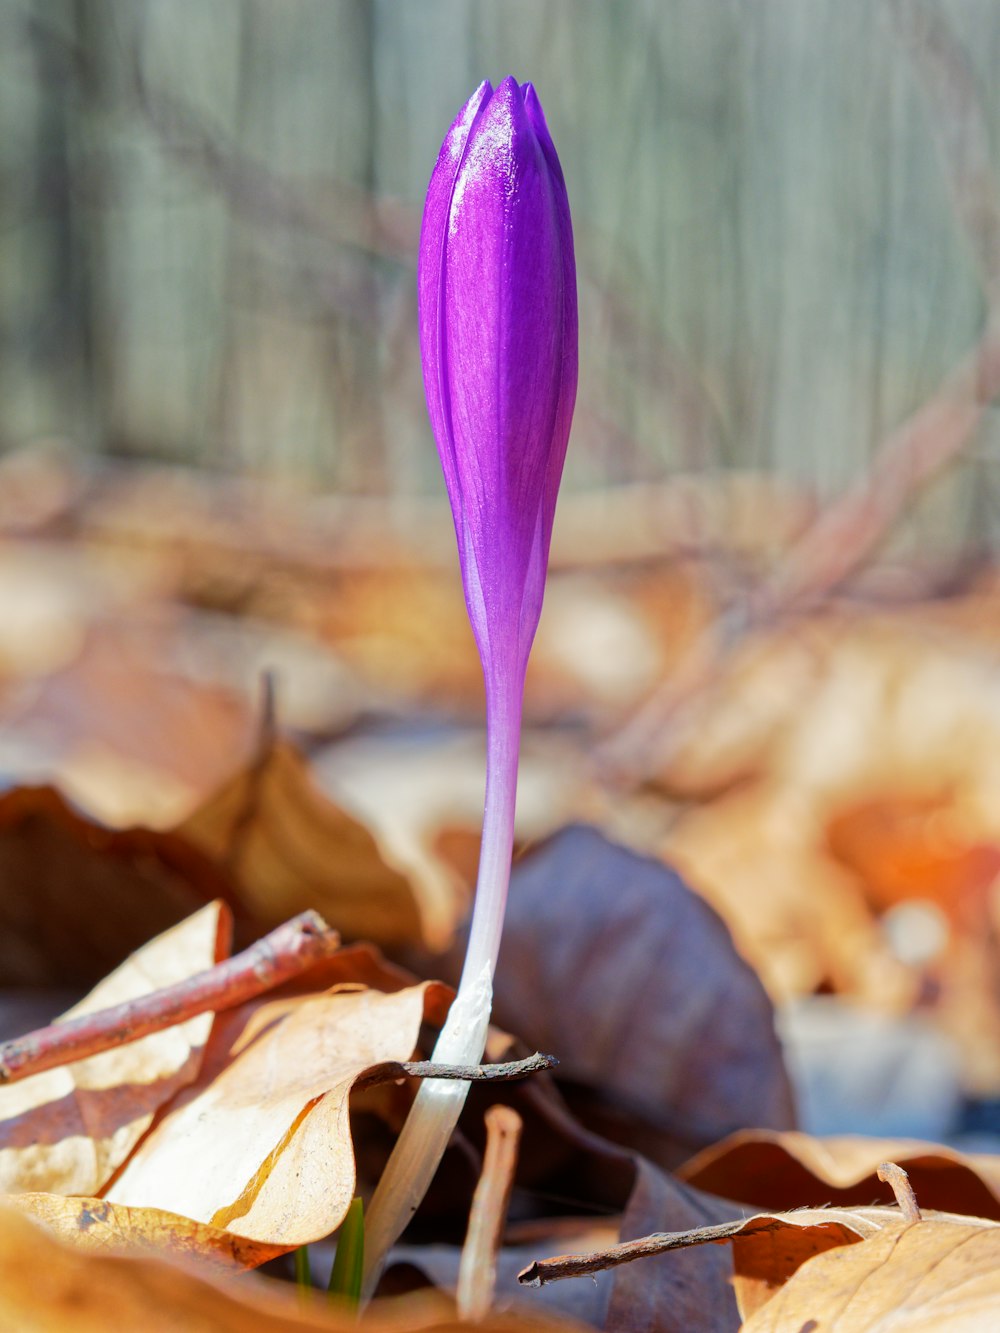 a purple flower that is growing out of the ground